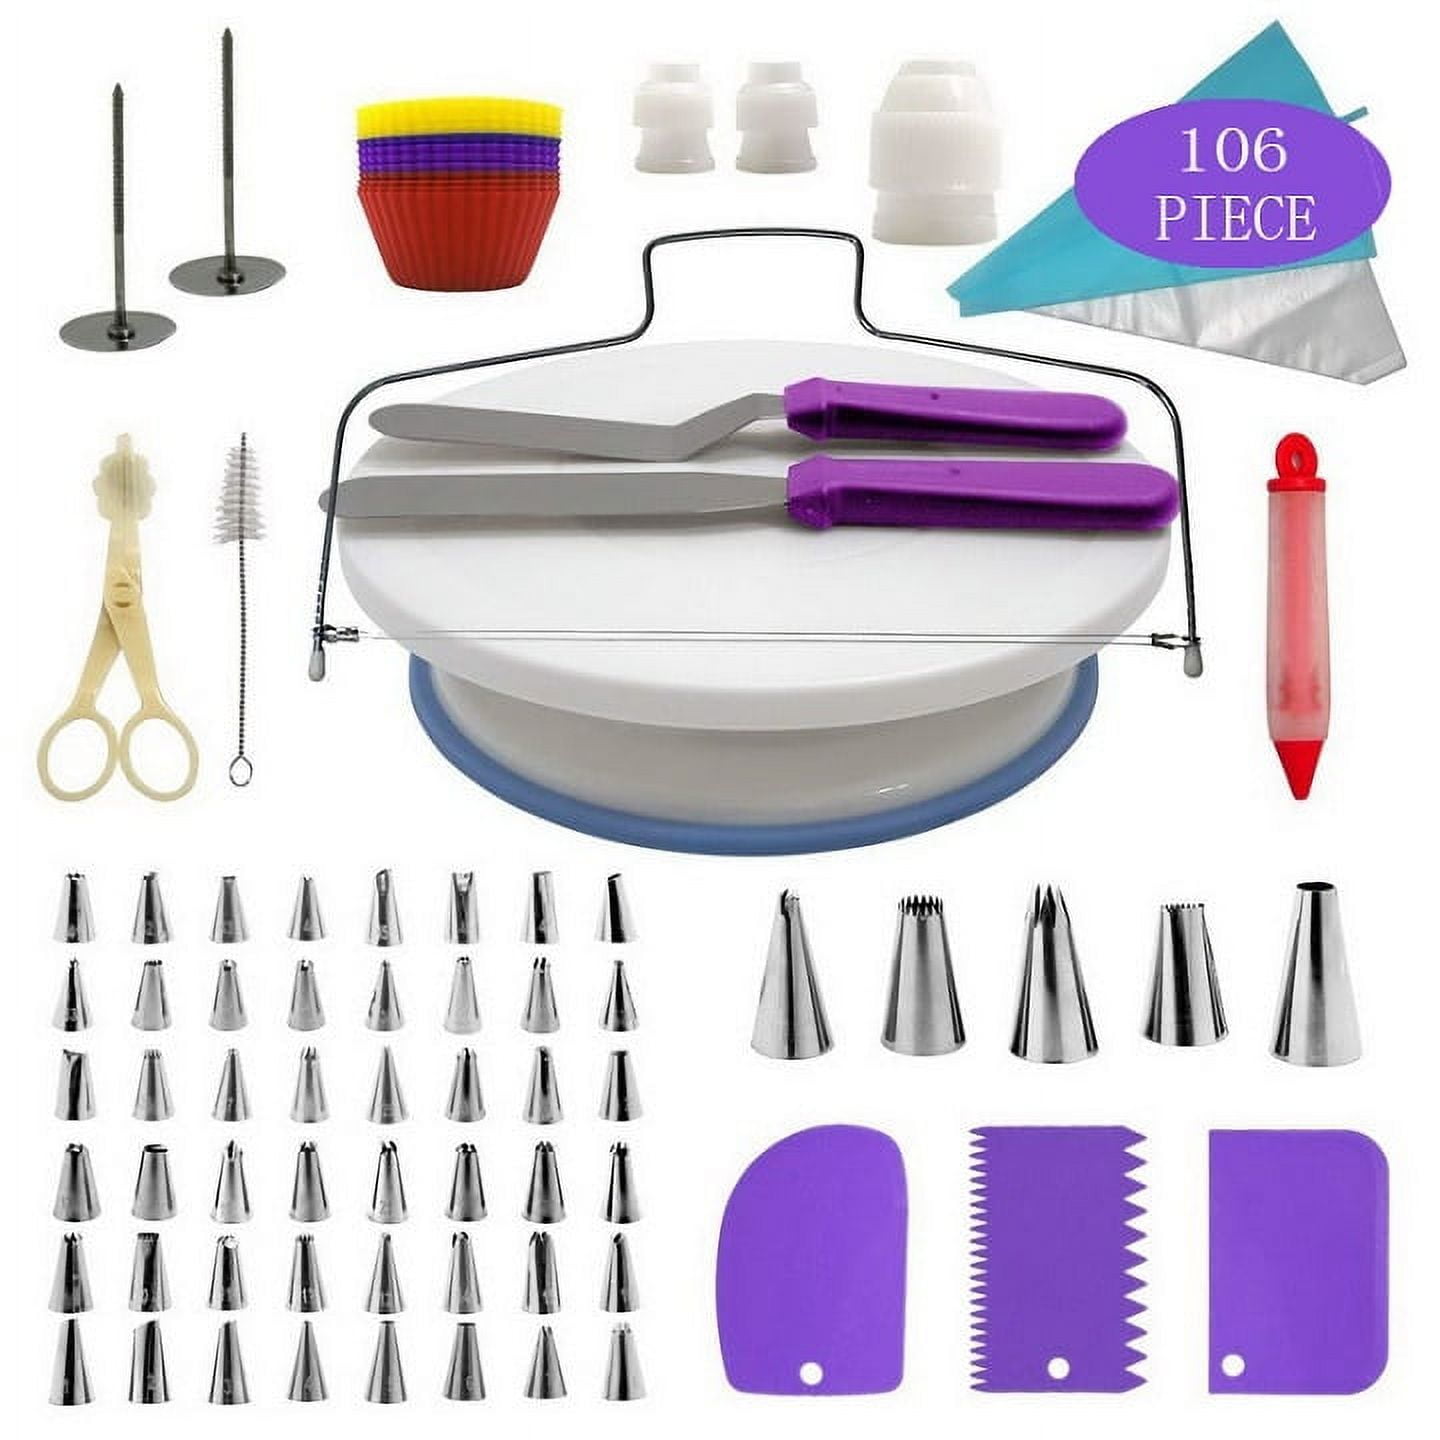 Cake Decorating Supplies Kit for Beginners, 237 Pieces, Ultimate Kitchen  Patisserie & Baking Supplies Set with Turntable Stand - AliExpress